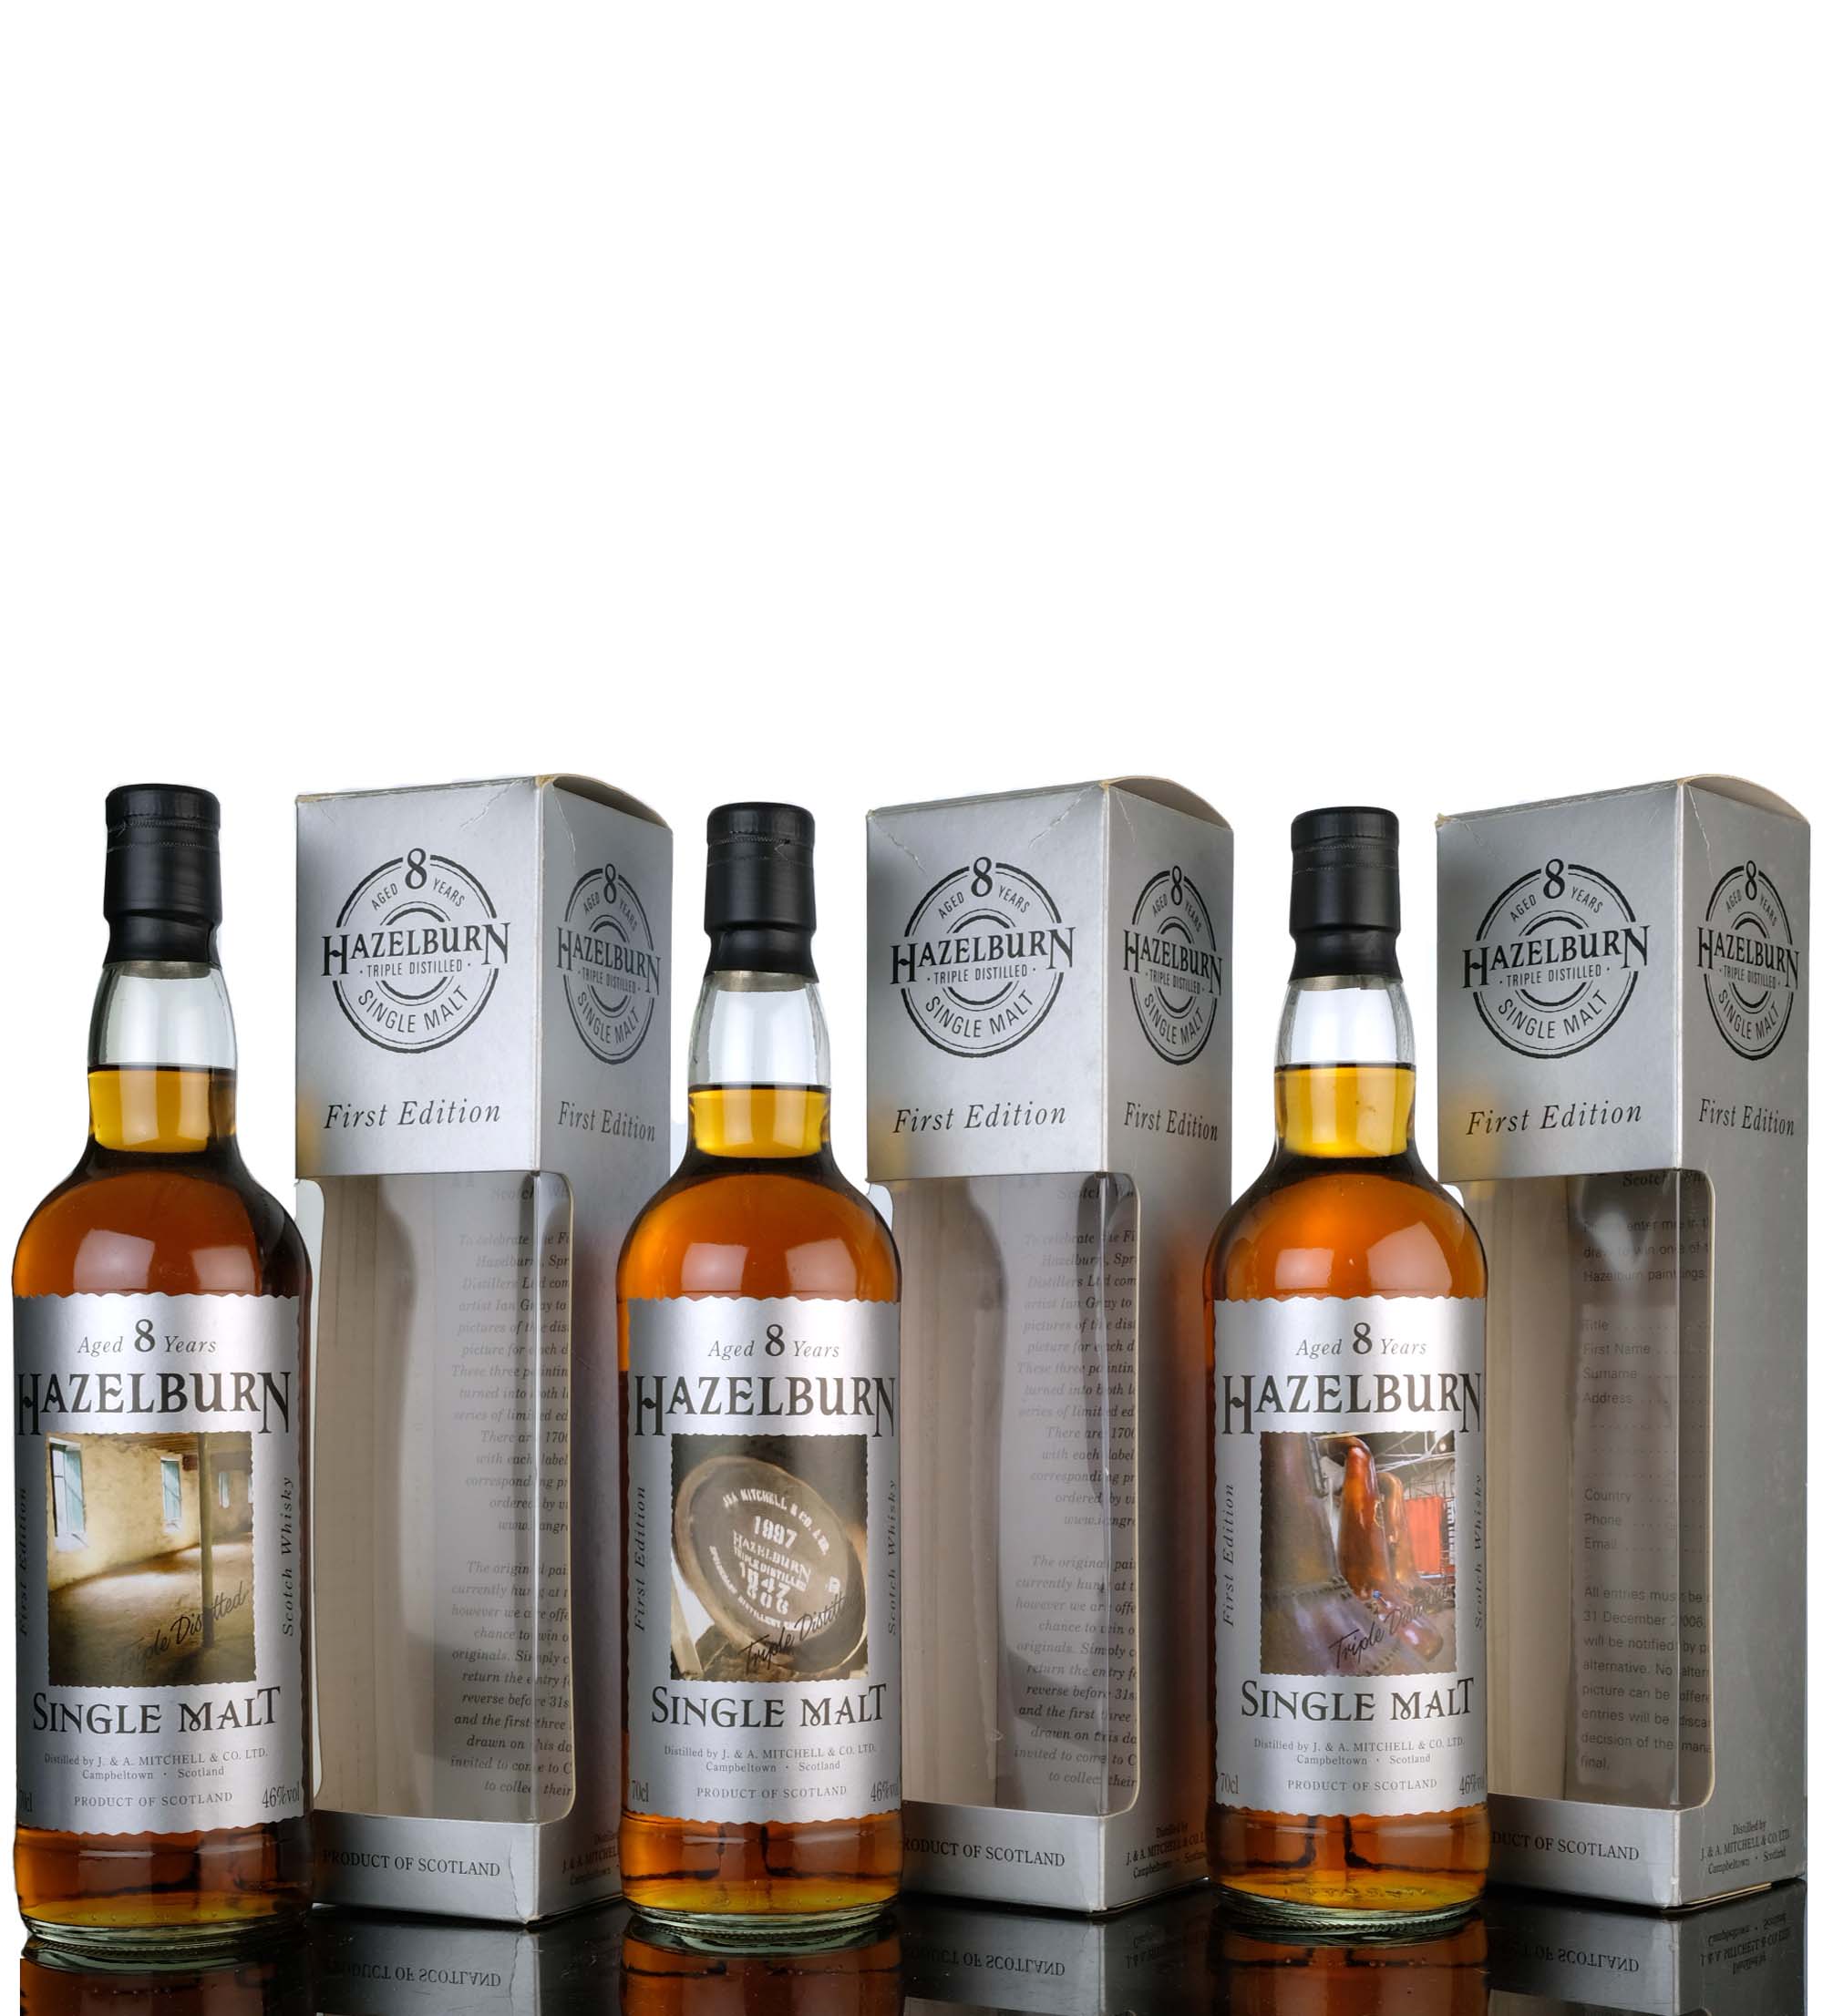 Hazelburn 8 Year Old - First Edition - 2005 Release - Full Set